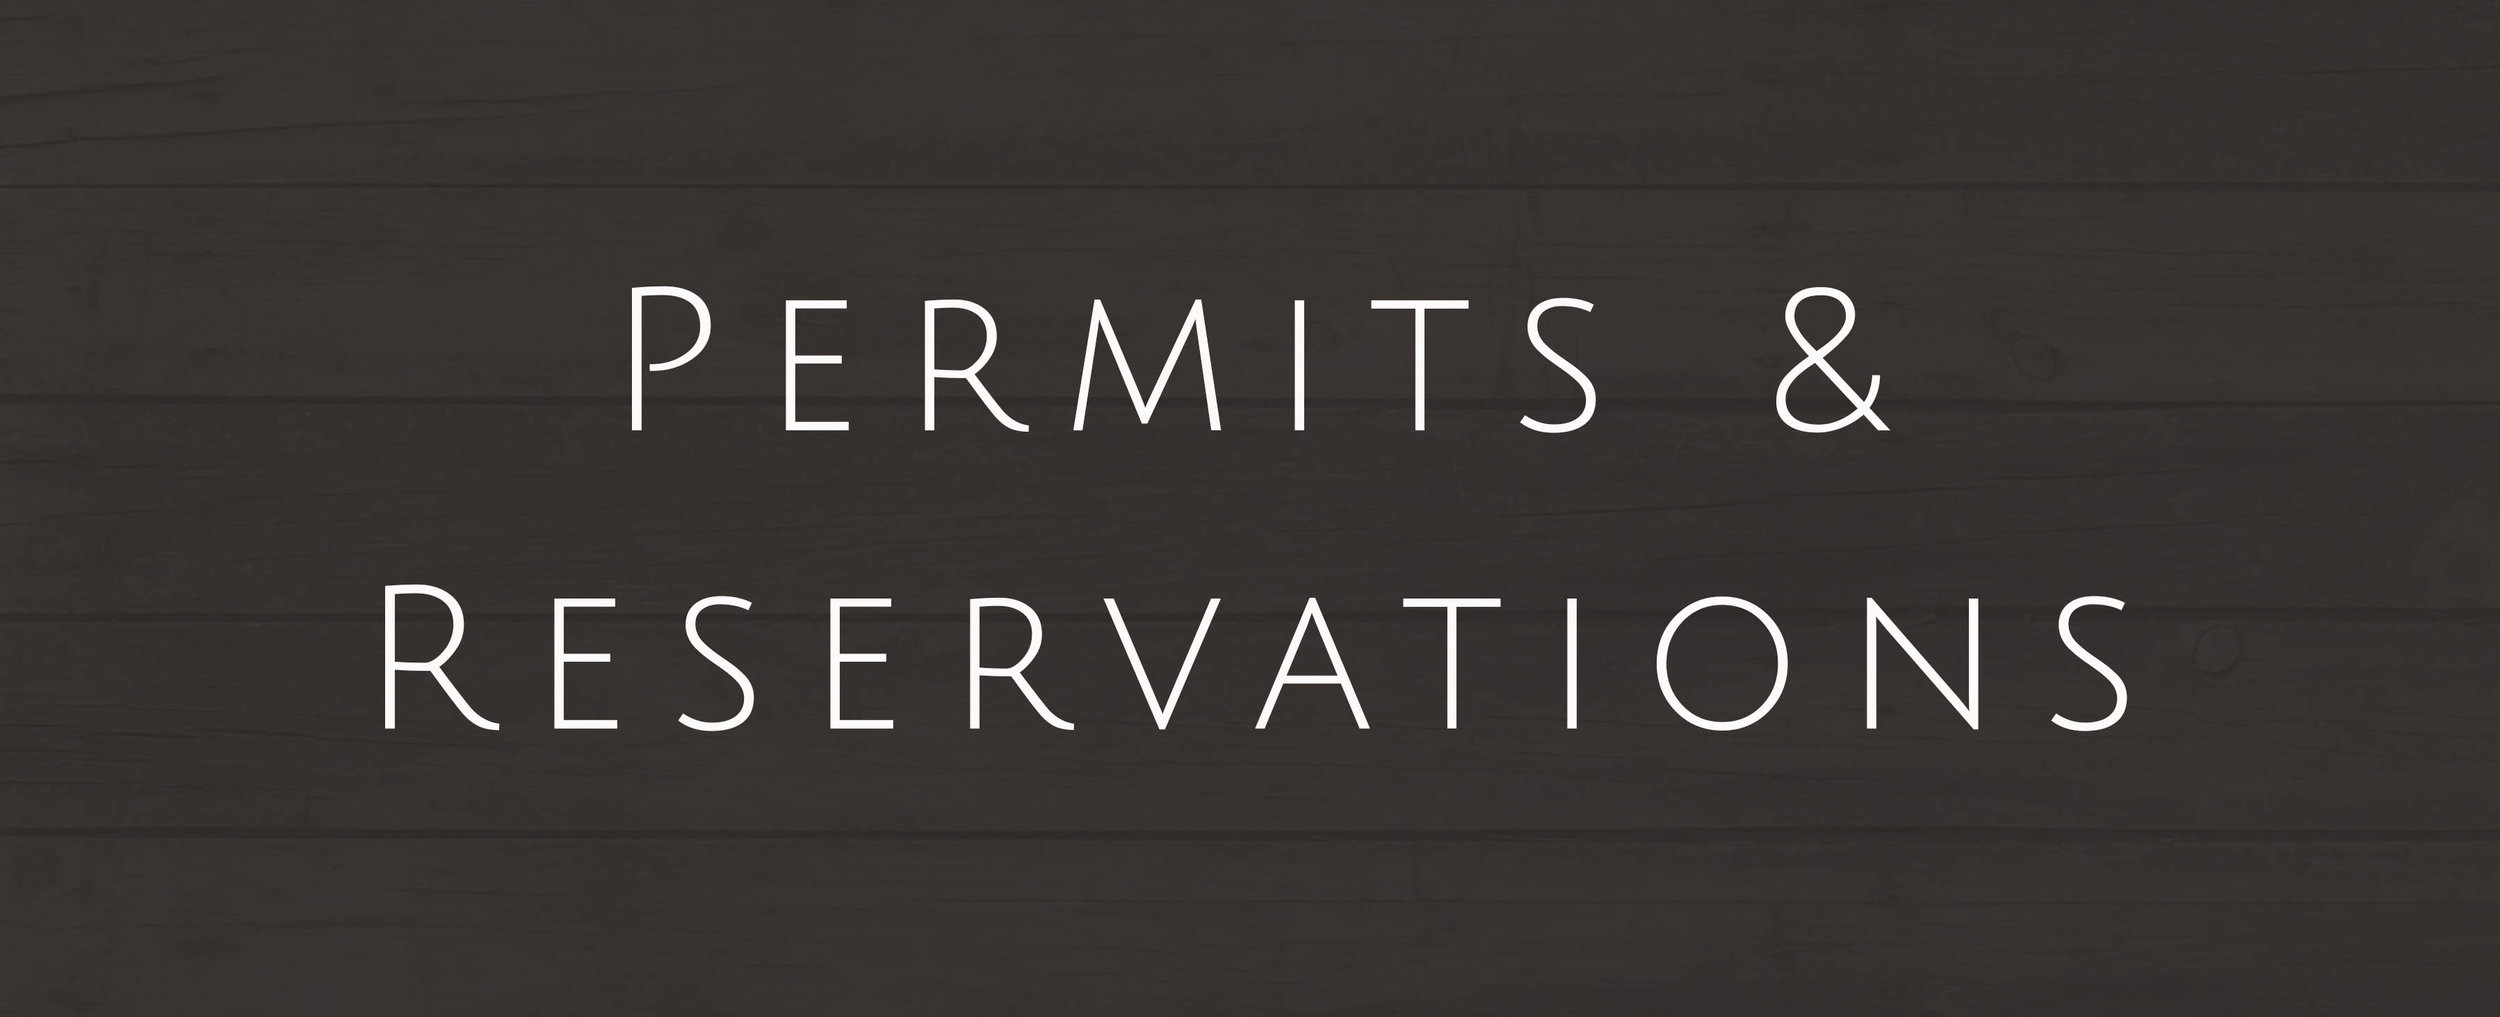 All - Permits and Reservations.jpg